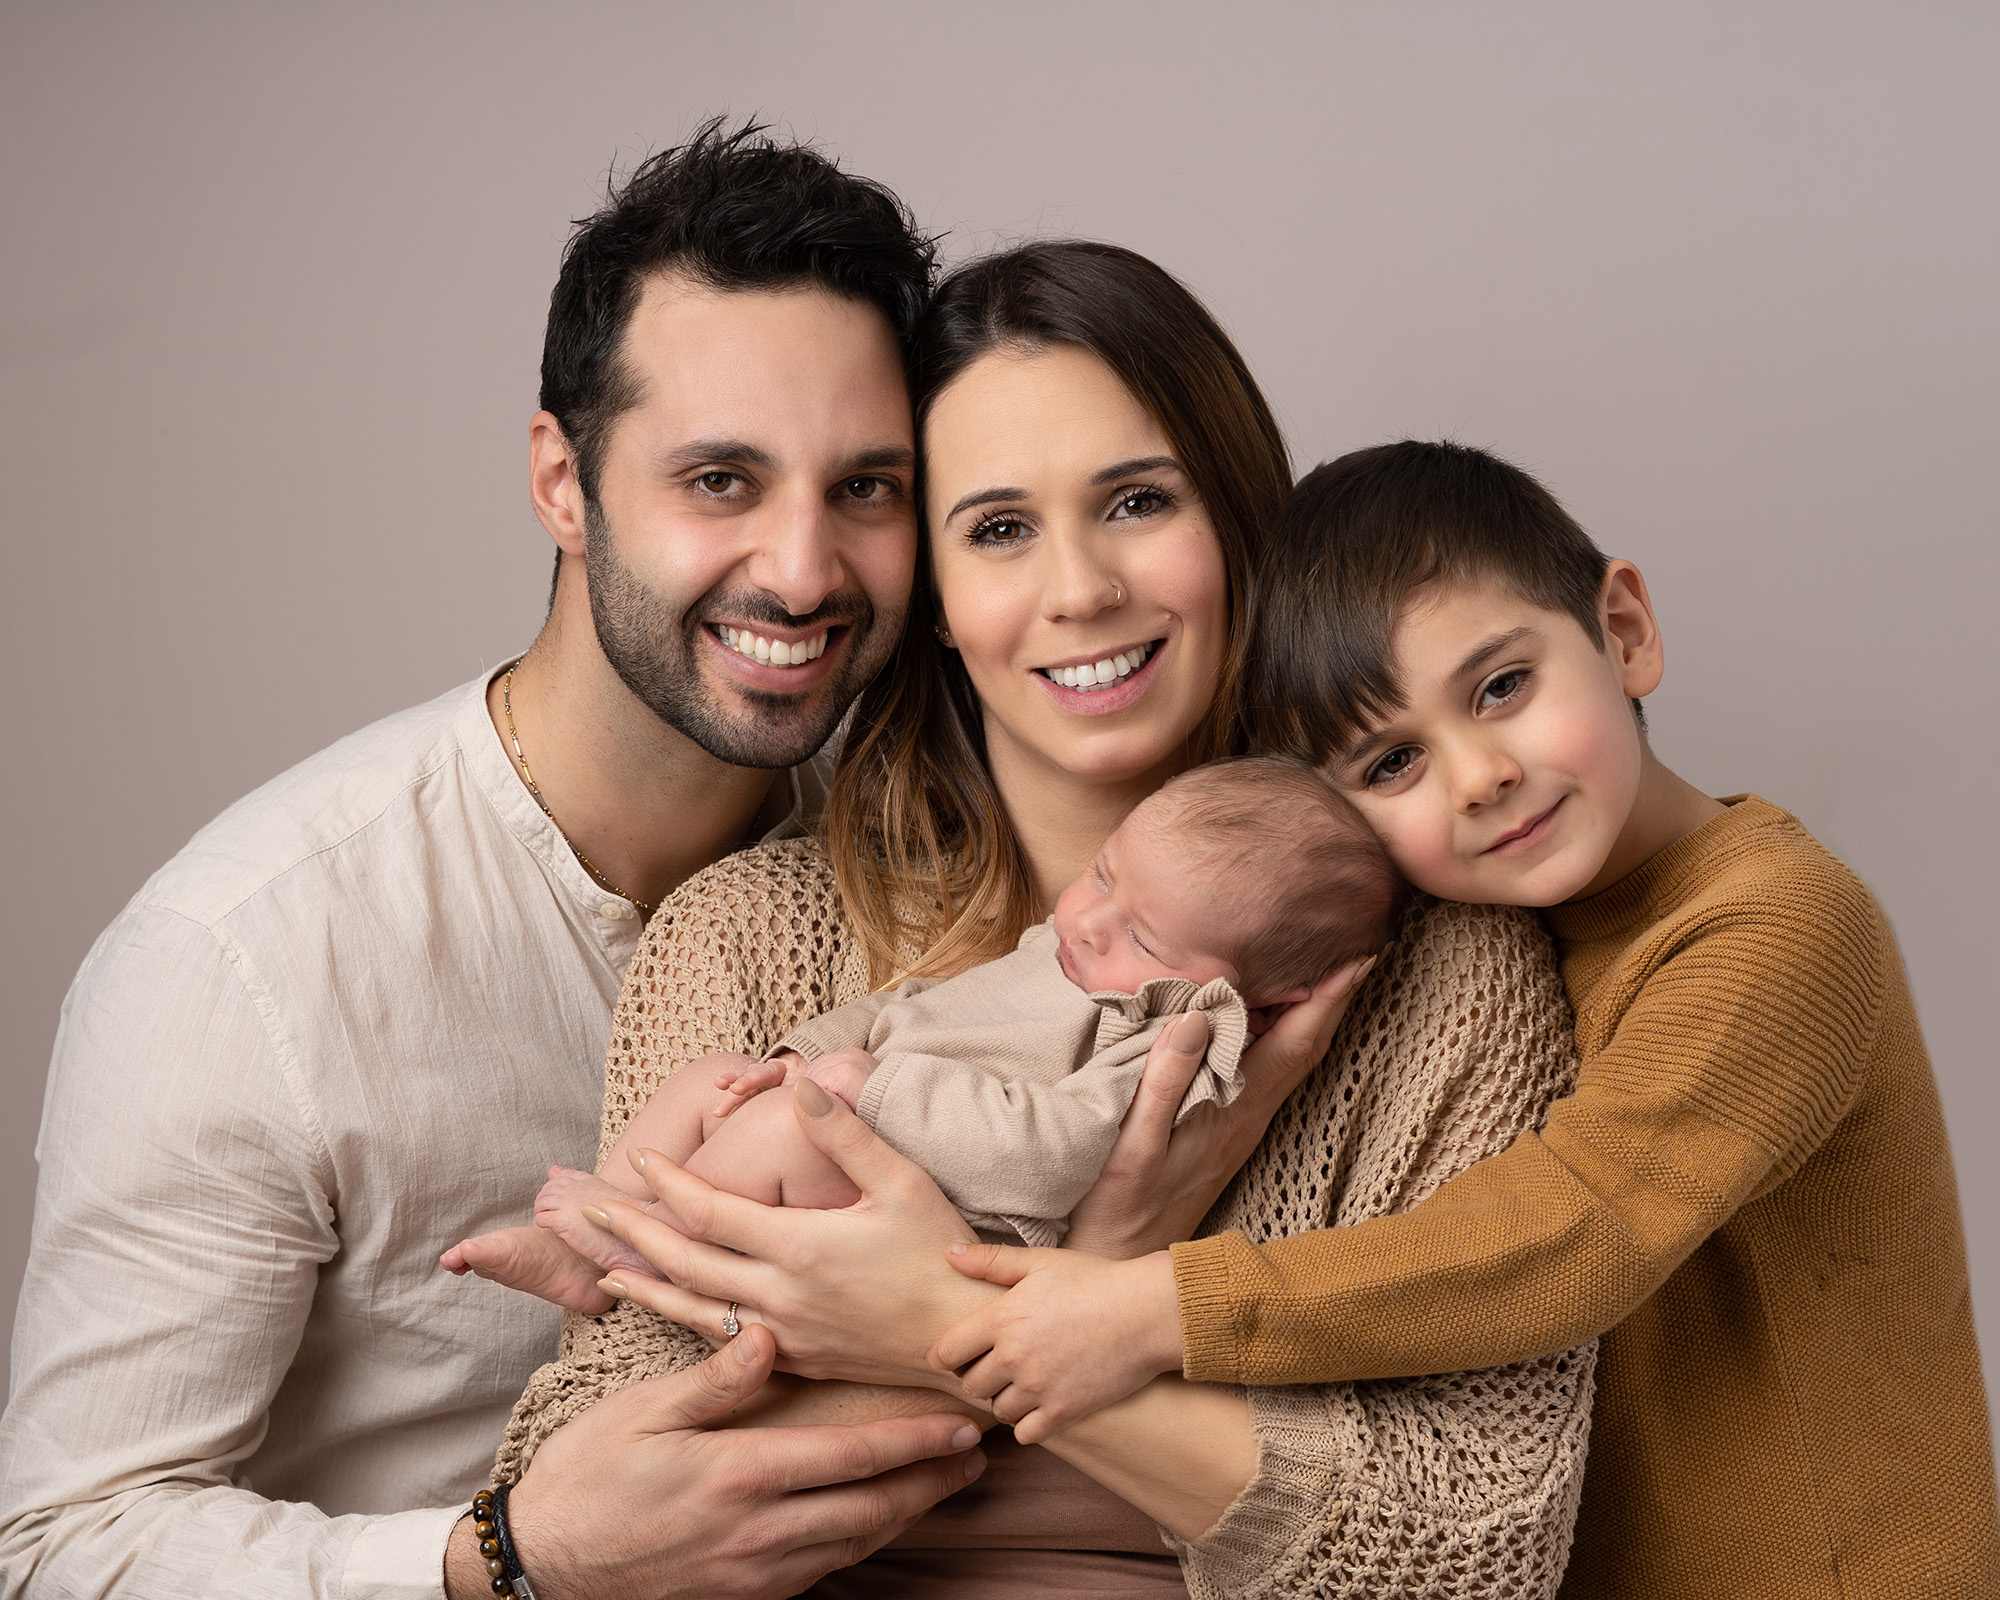 family portrait photograph with newborn baby by newborn photographer in Guildford, Surrey